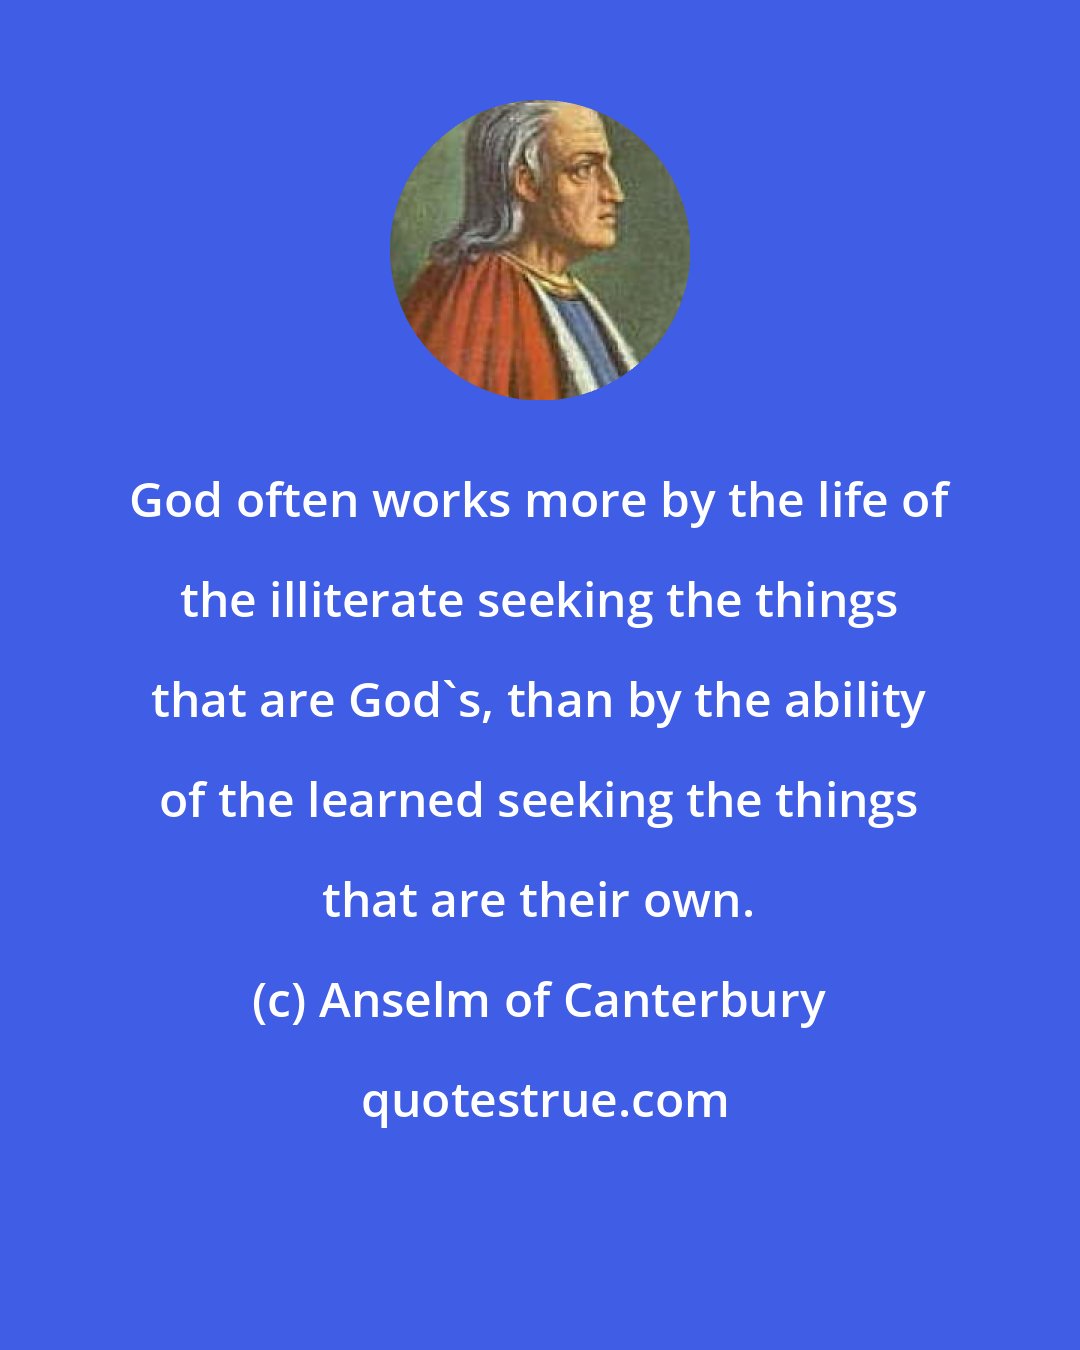 Anselm of Canterbury: God often works more by the life of the illiterate seeking the things that are God's, than by the ability of the learned seeking the things that are their own.